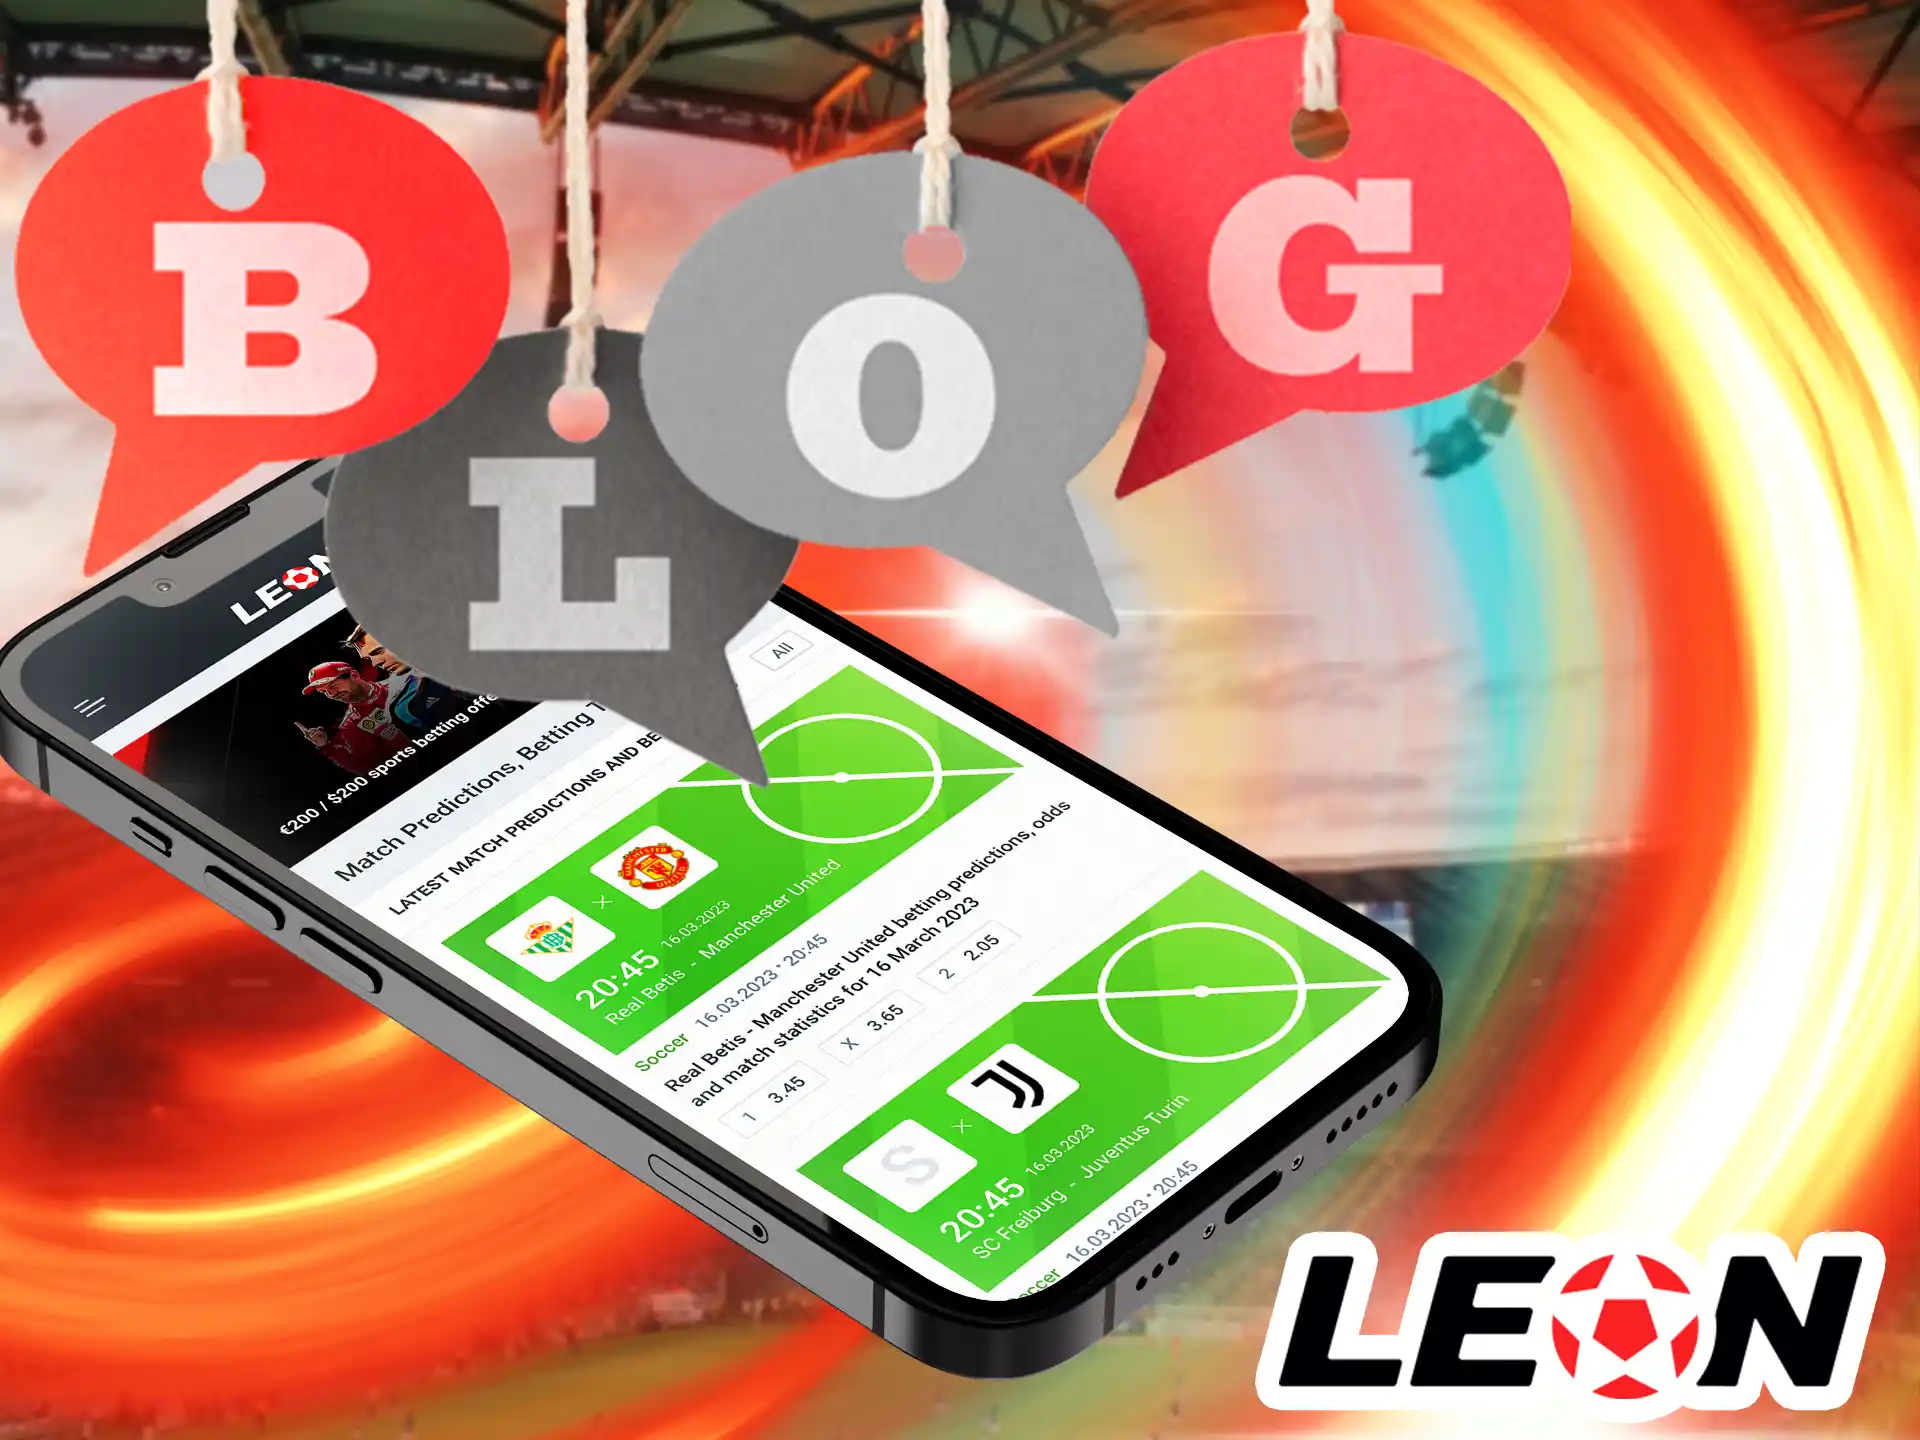 It is always a good idea to stay up-to-date on all the new developments at Leon Bet, as well as important information about athletes.